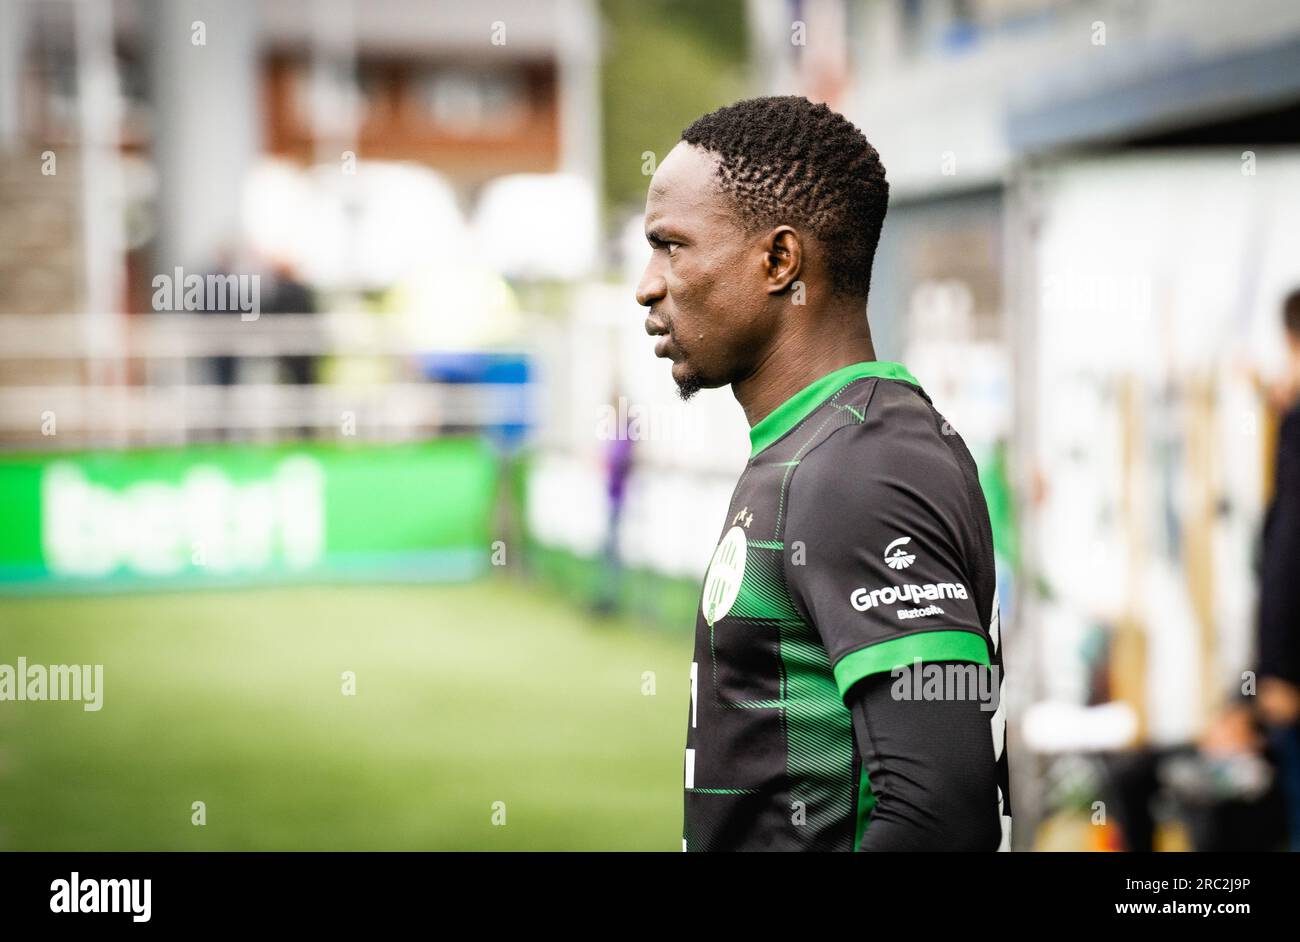 BUDAPEST, HUNGARY - AUGUST 9: Adama Traore of Ferencvarosi TC controls the  ball during the UEFA Champions League Qualifying Round match between Ferencvarosi  TC and Qarabag FK at Ferencvaros Stadium on August